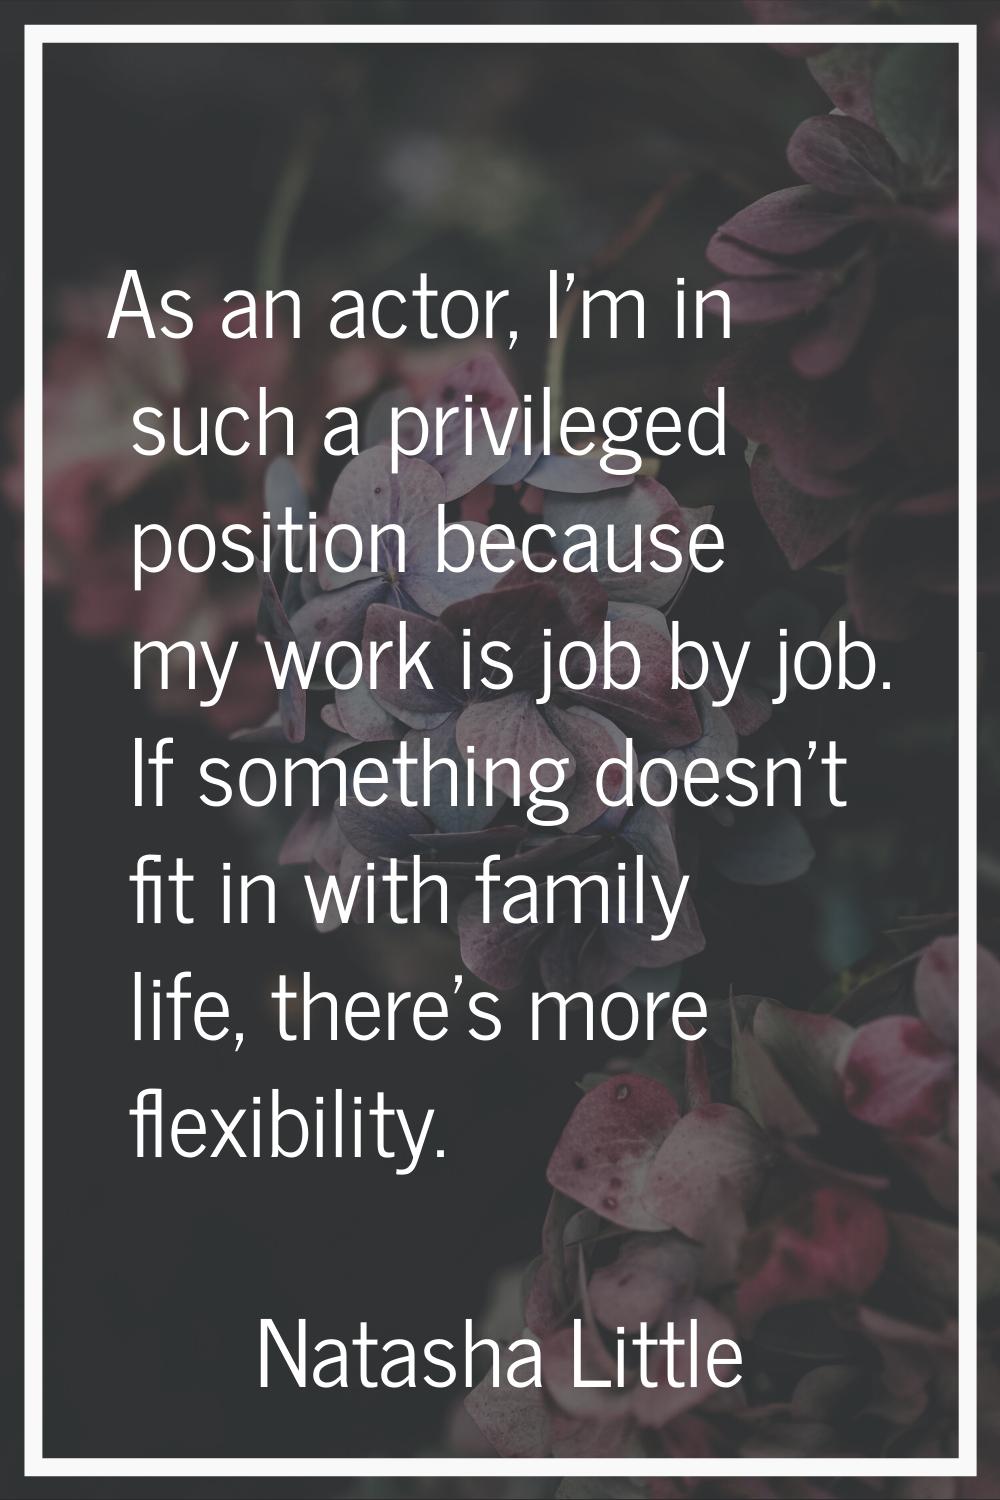 As an actor, I'm in such a privileged position because my work is job by job. If something doesn't 